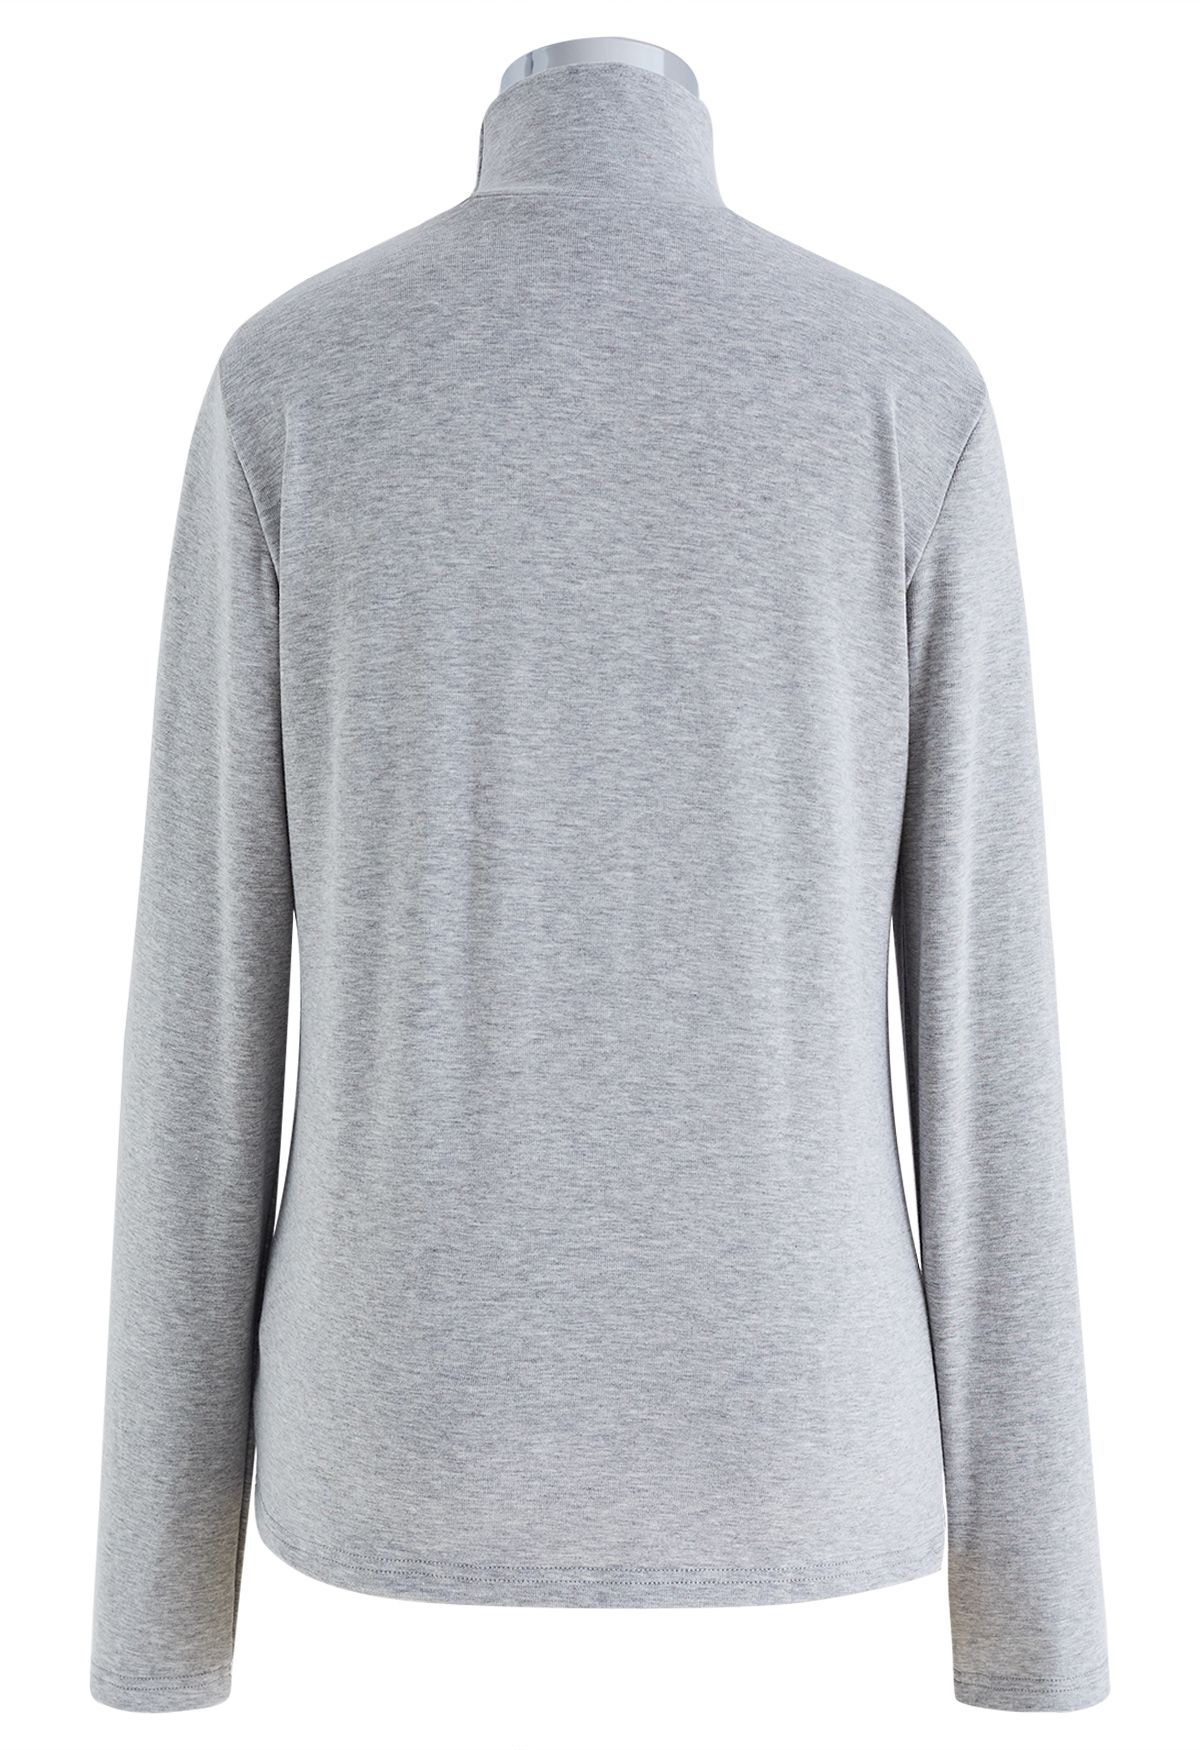 Embossed Seam Detail High Neck Knit Top in Grey